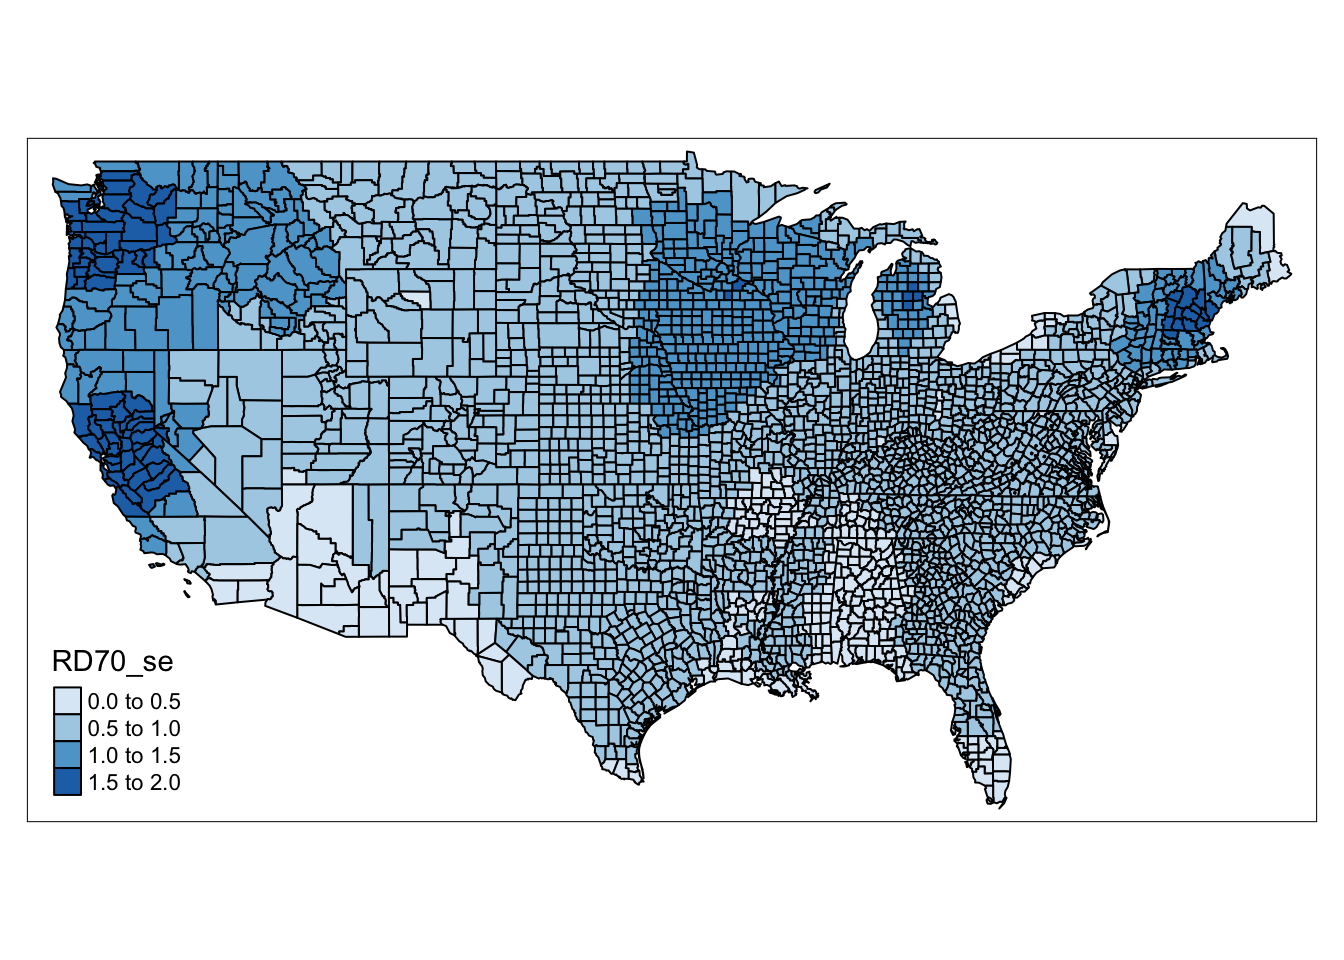 This shaded map of the counties of the United States has a legend titled 'RD70 se', matching values increasing from zero to darker shades of blue. Counties around the west coast, upper midwest, and New Hampshire are dark blues, while some of the south on both sides of Texas are very light blue.